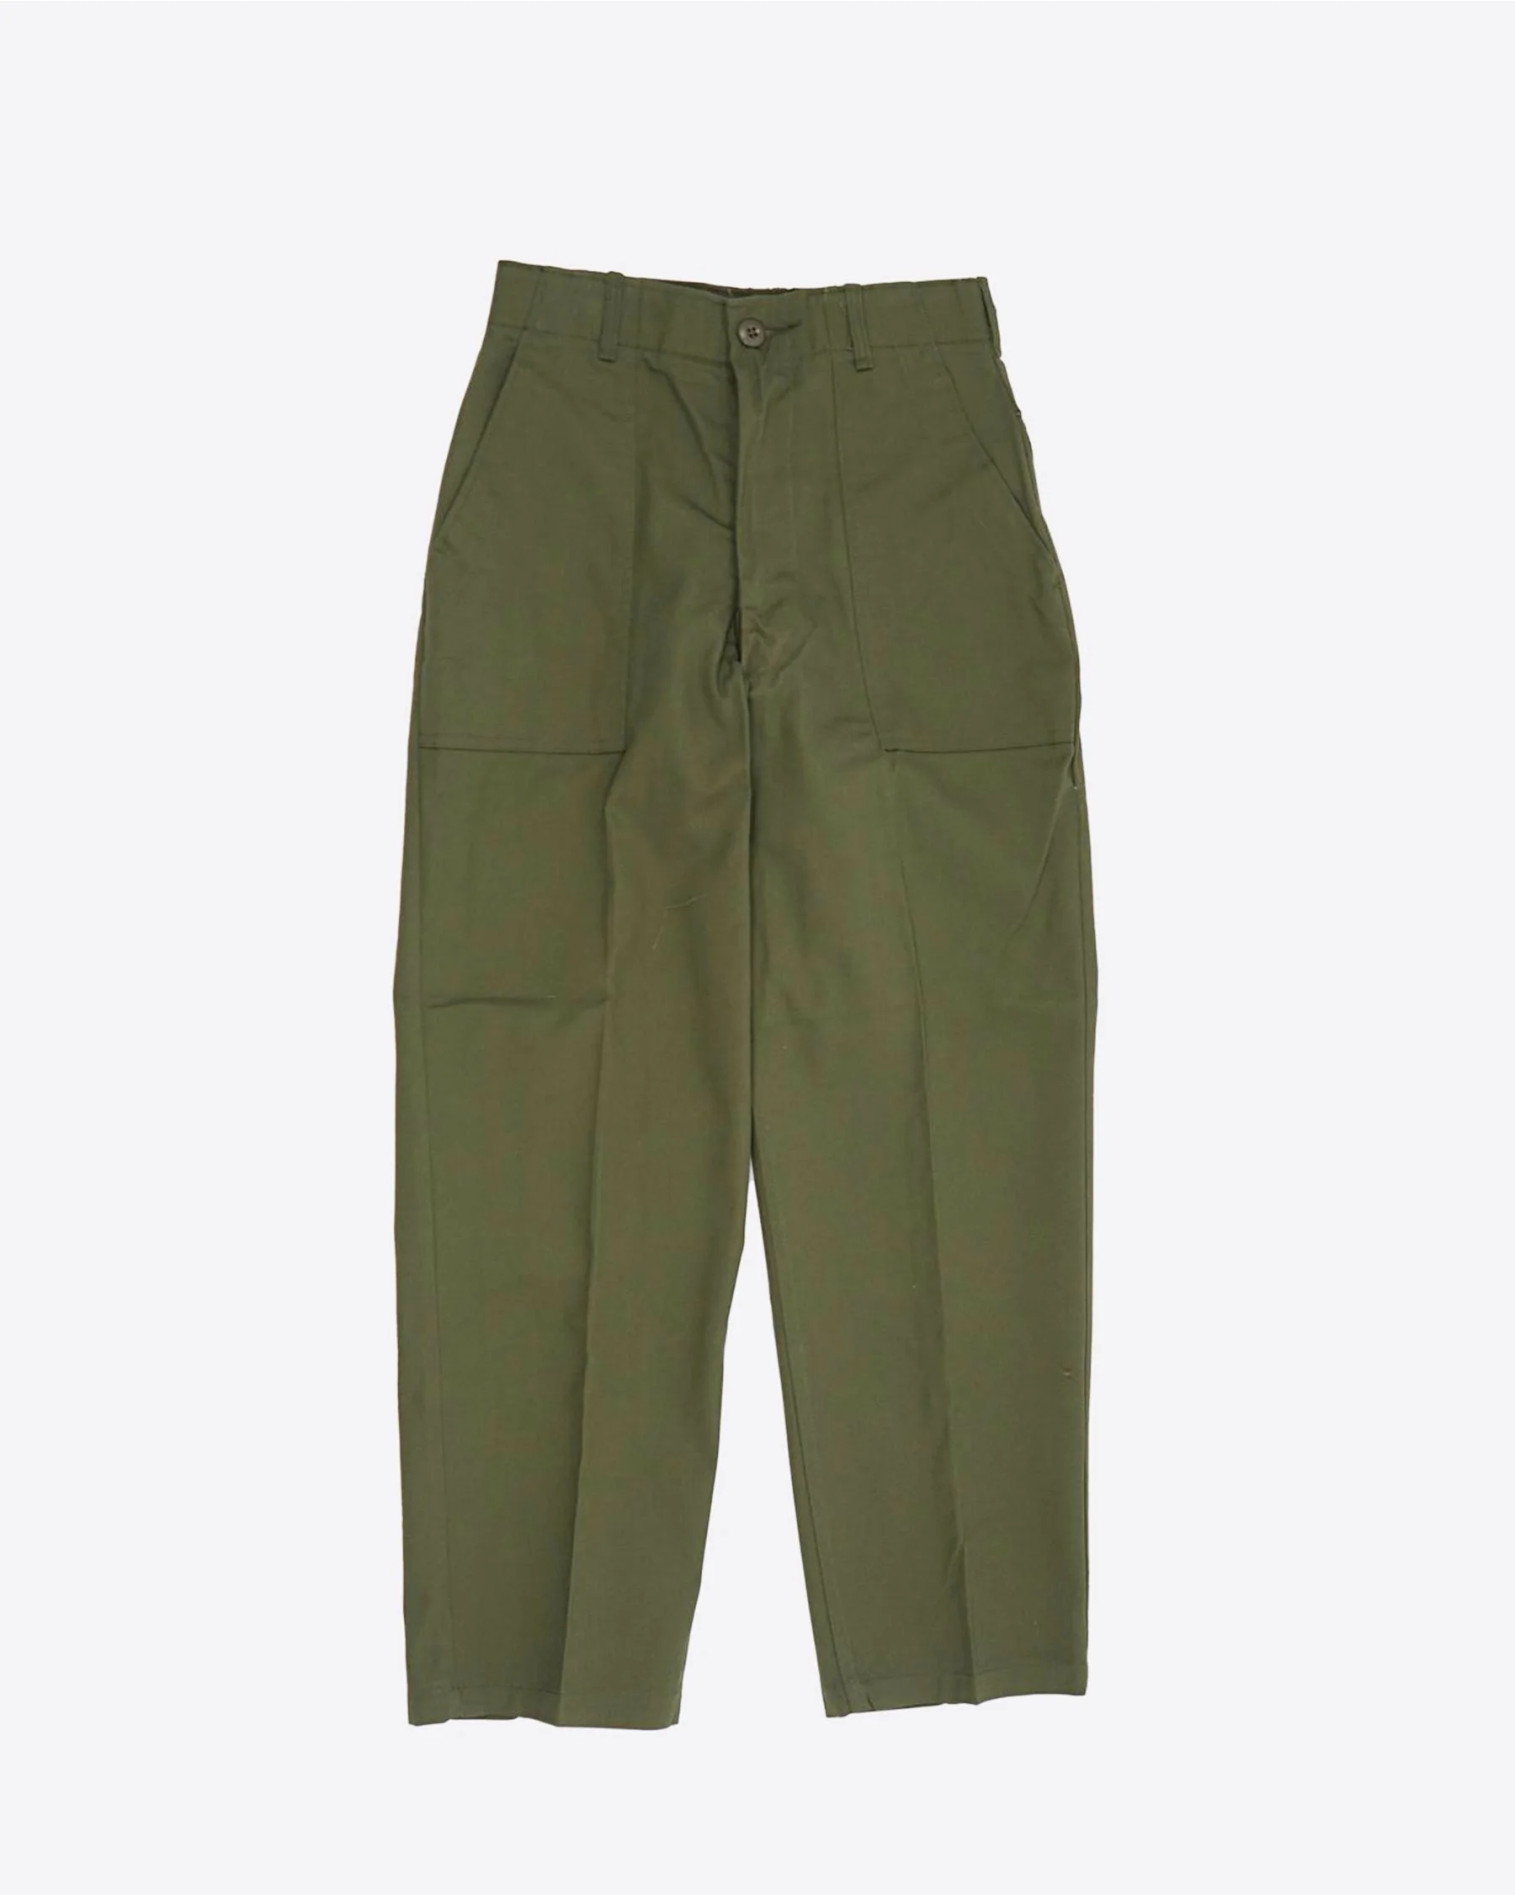 U.S. Armed Forces OG 507 Utility Trousers